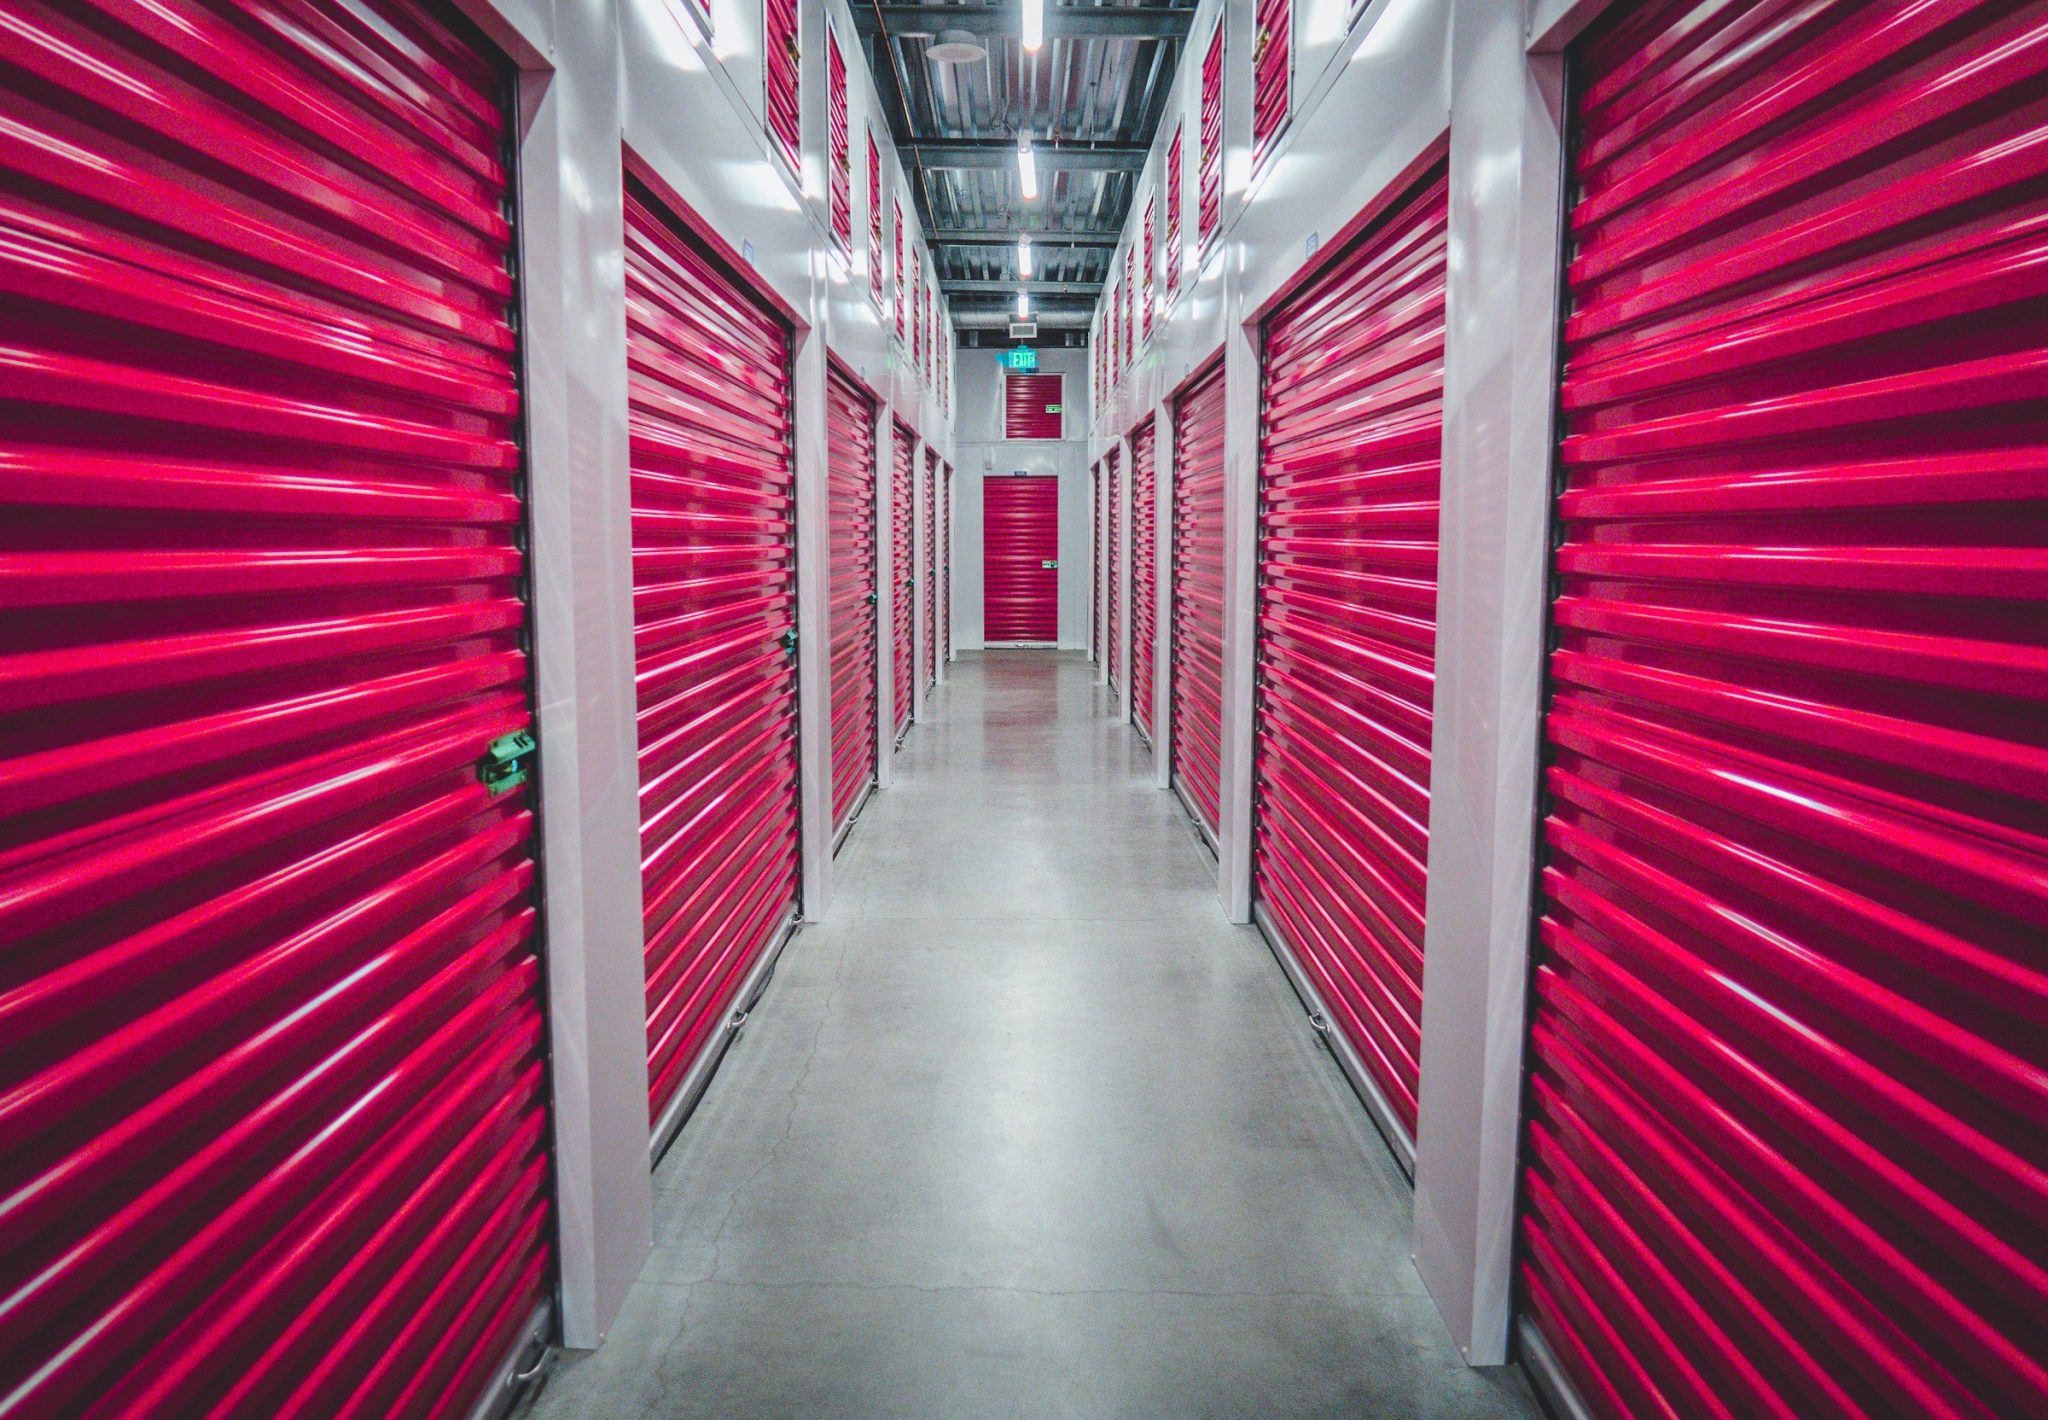 Going on a long trip soon? Here’s how self-storage can help